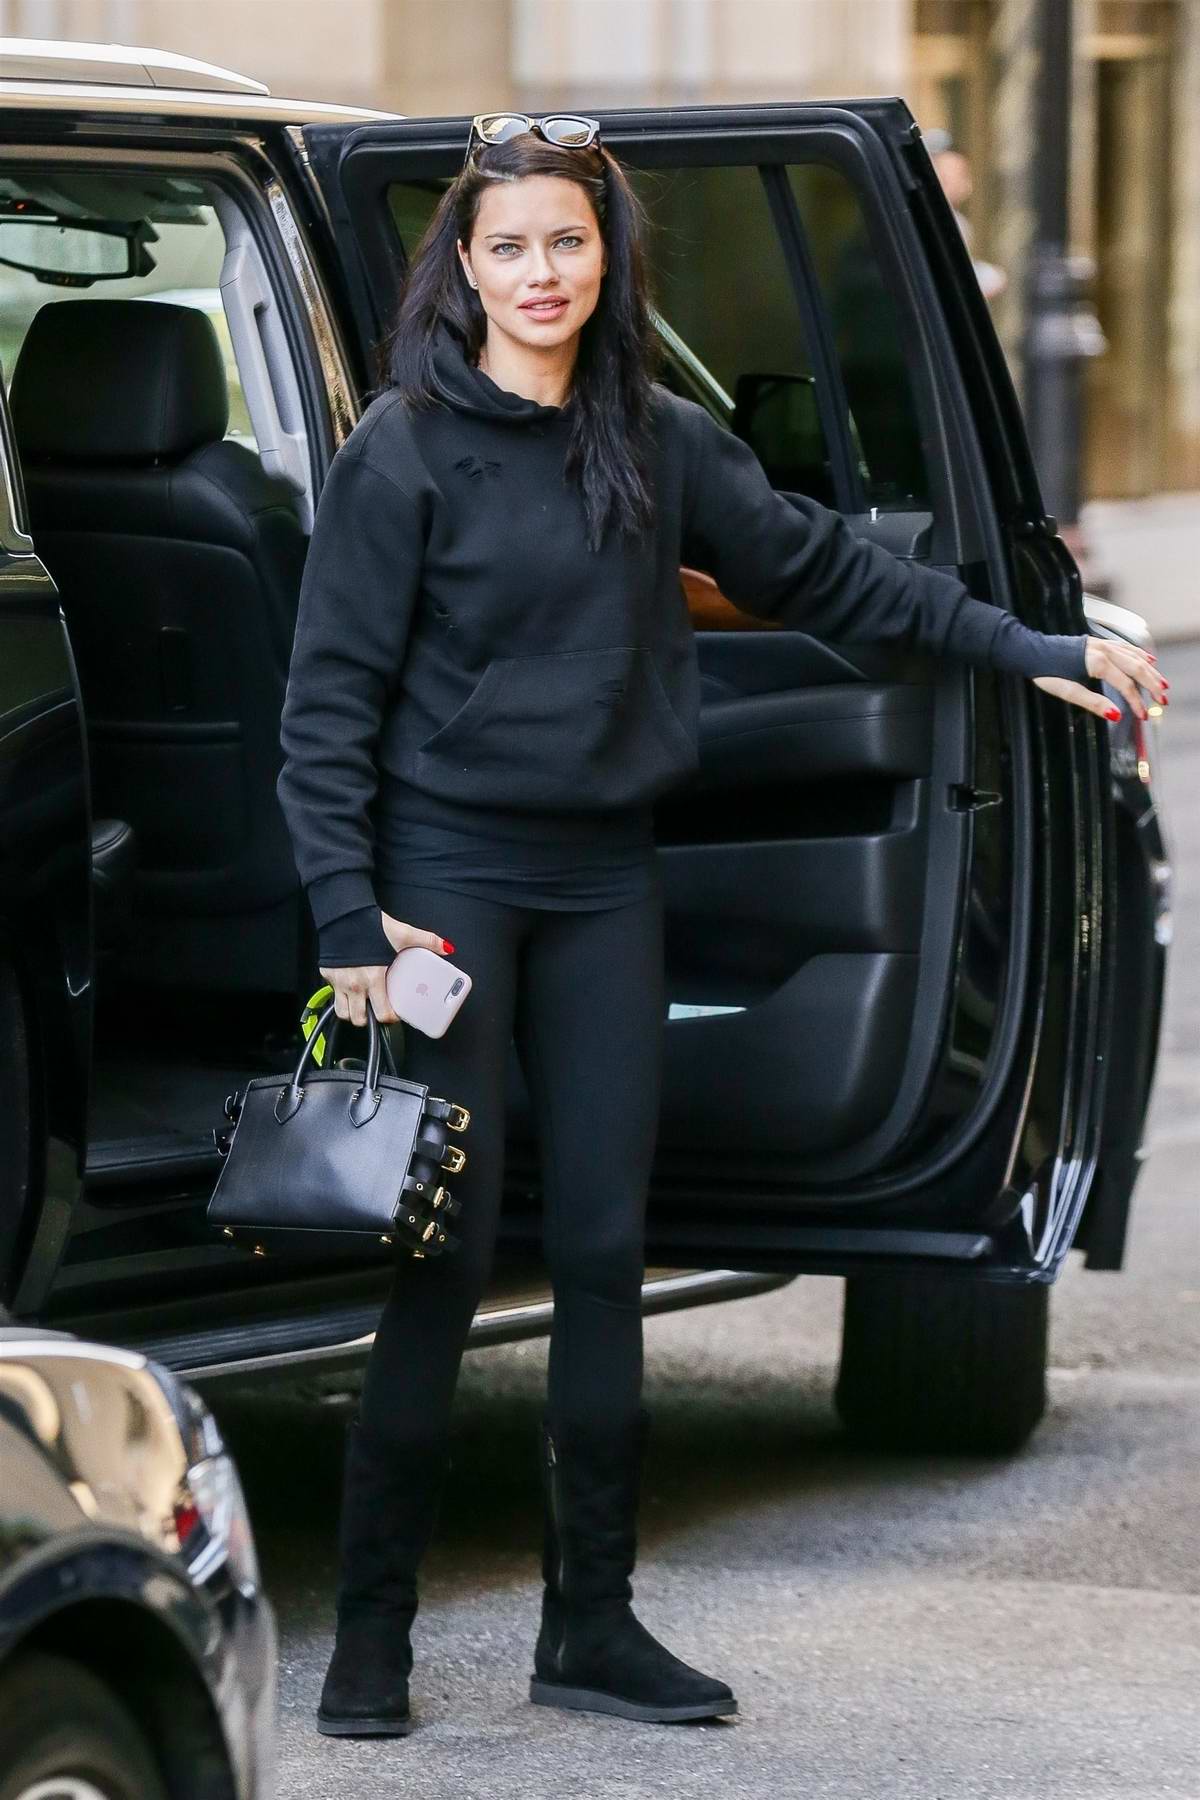 Bella Hadid wears a bright red sweater and black leggings while out on an  afternoon stroll